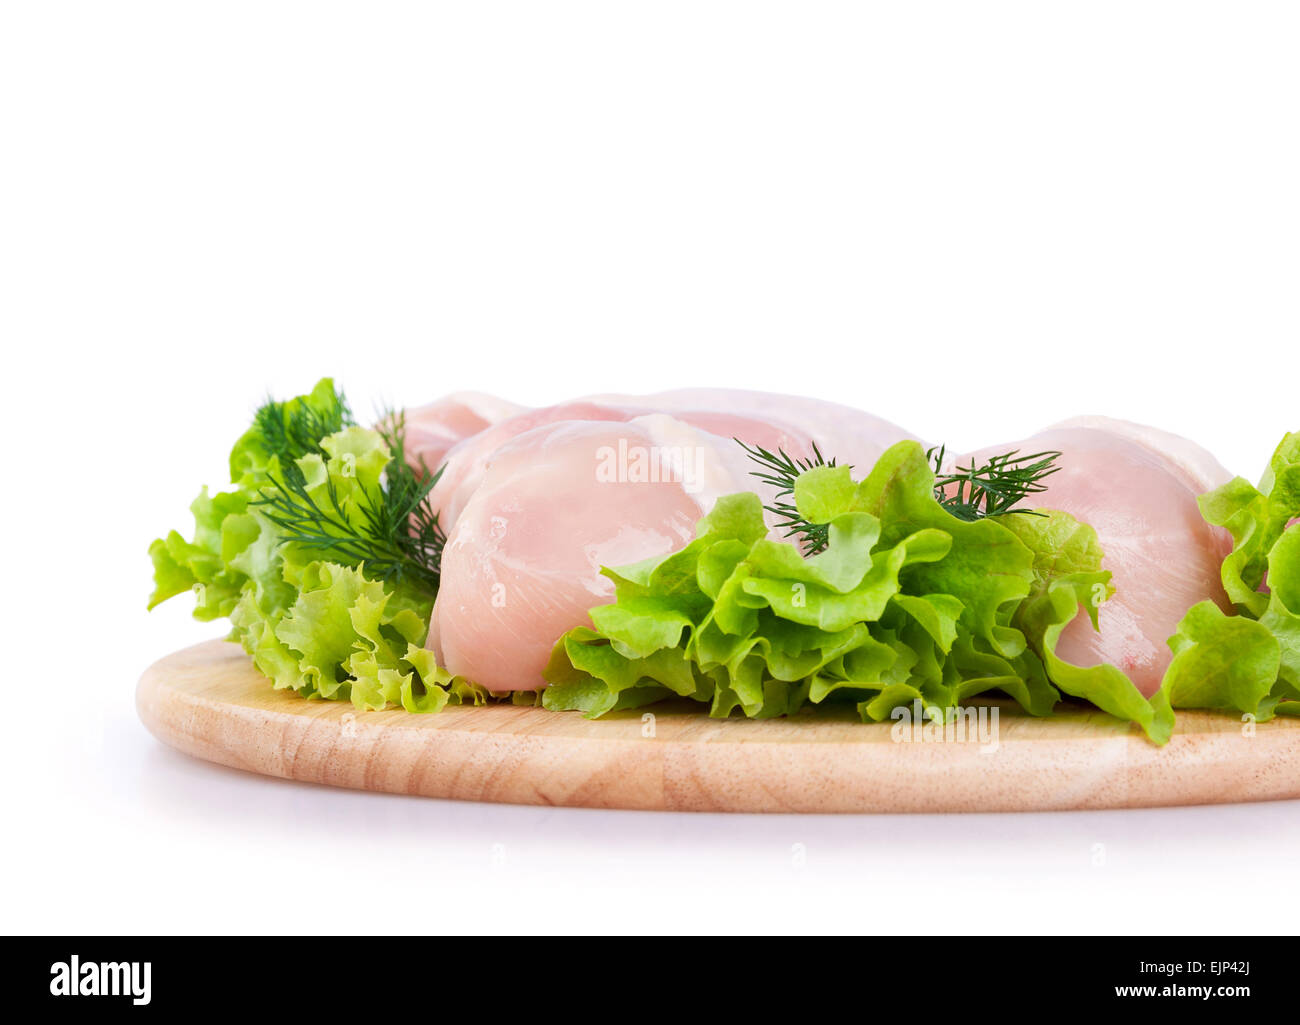 Raw chicken meat with green salad on a wooden board Stock Photo